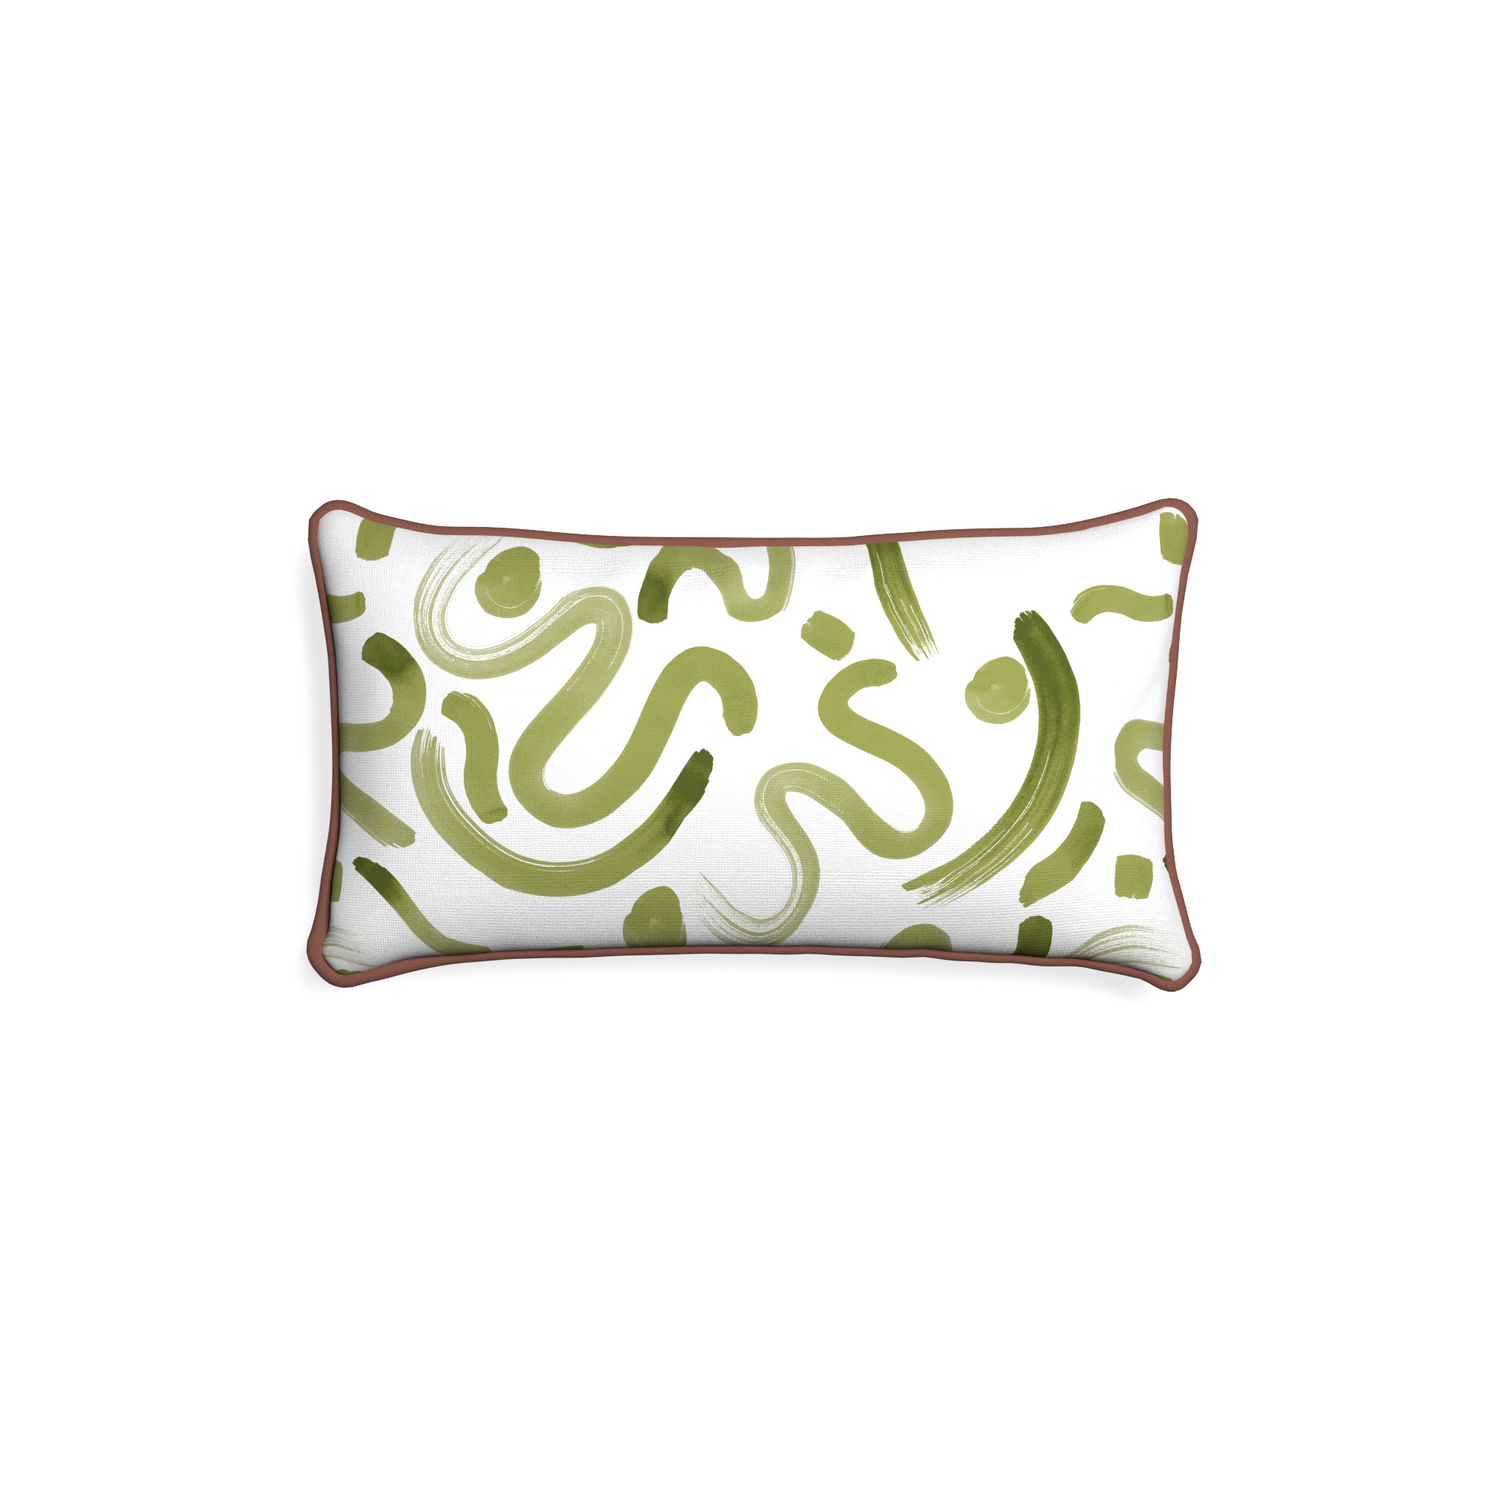 Petite-lumbar hockney moss custom moss greenpillow with w piping on white background